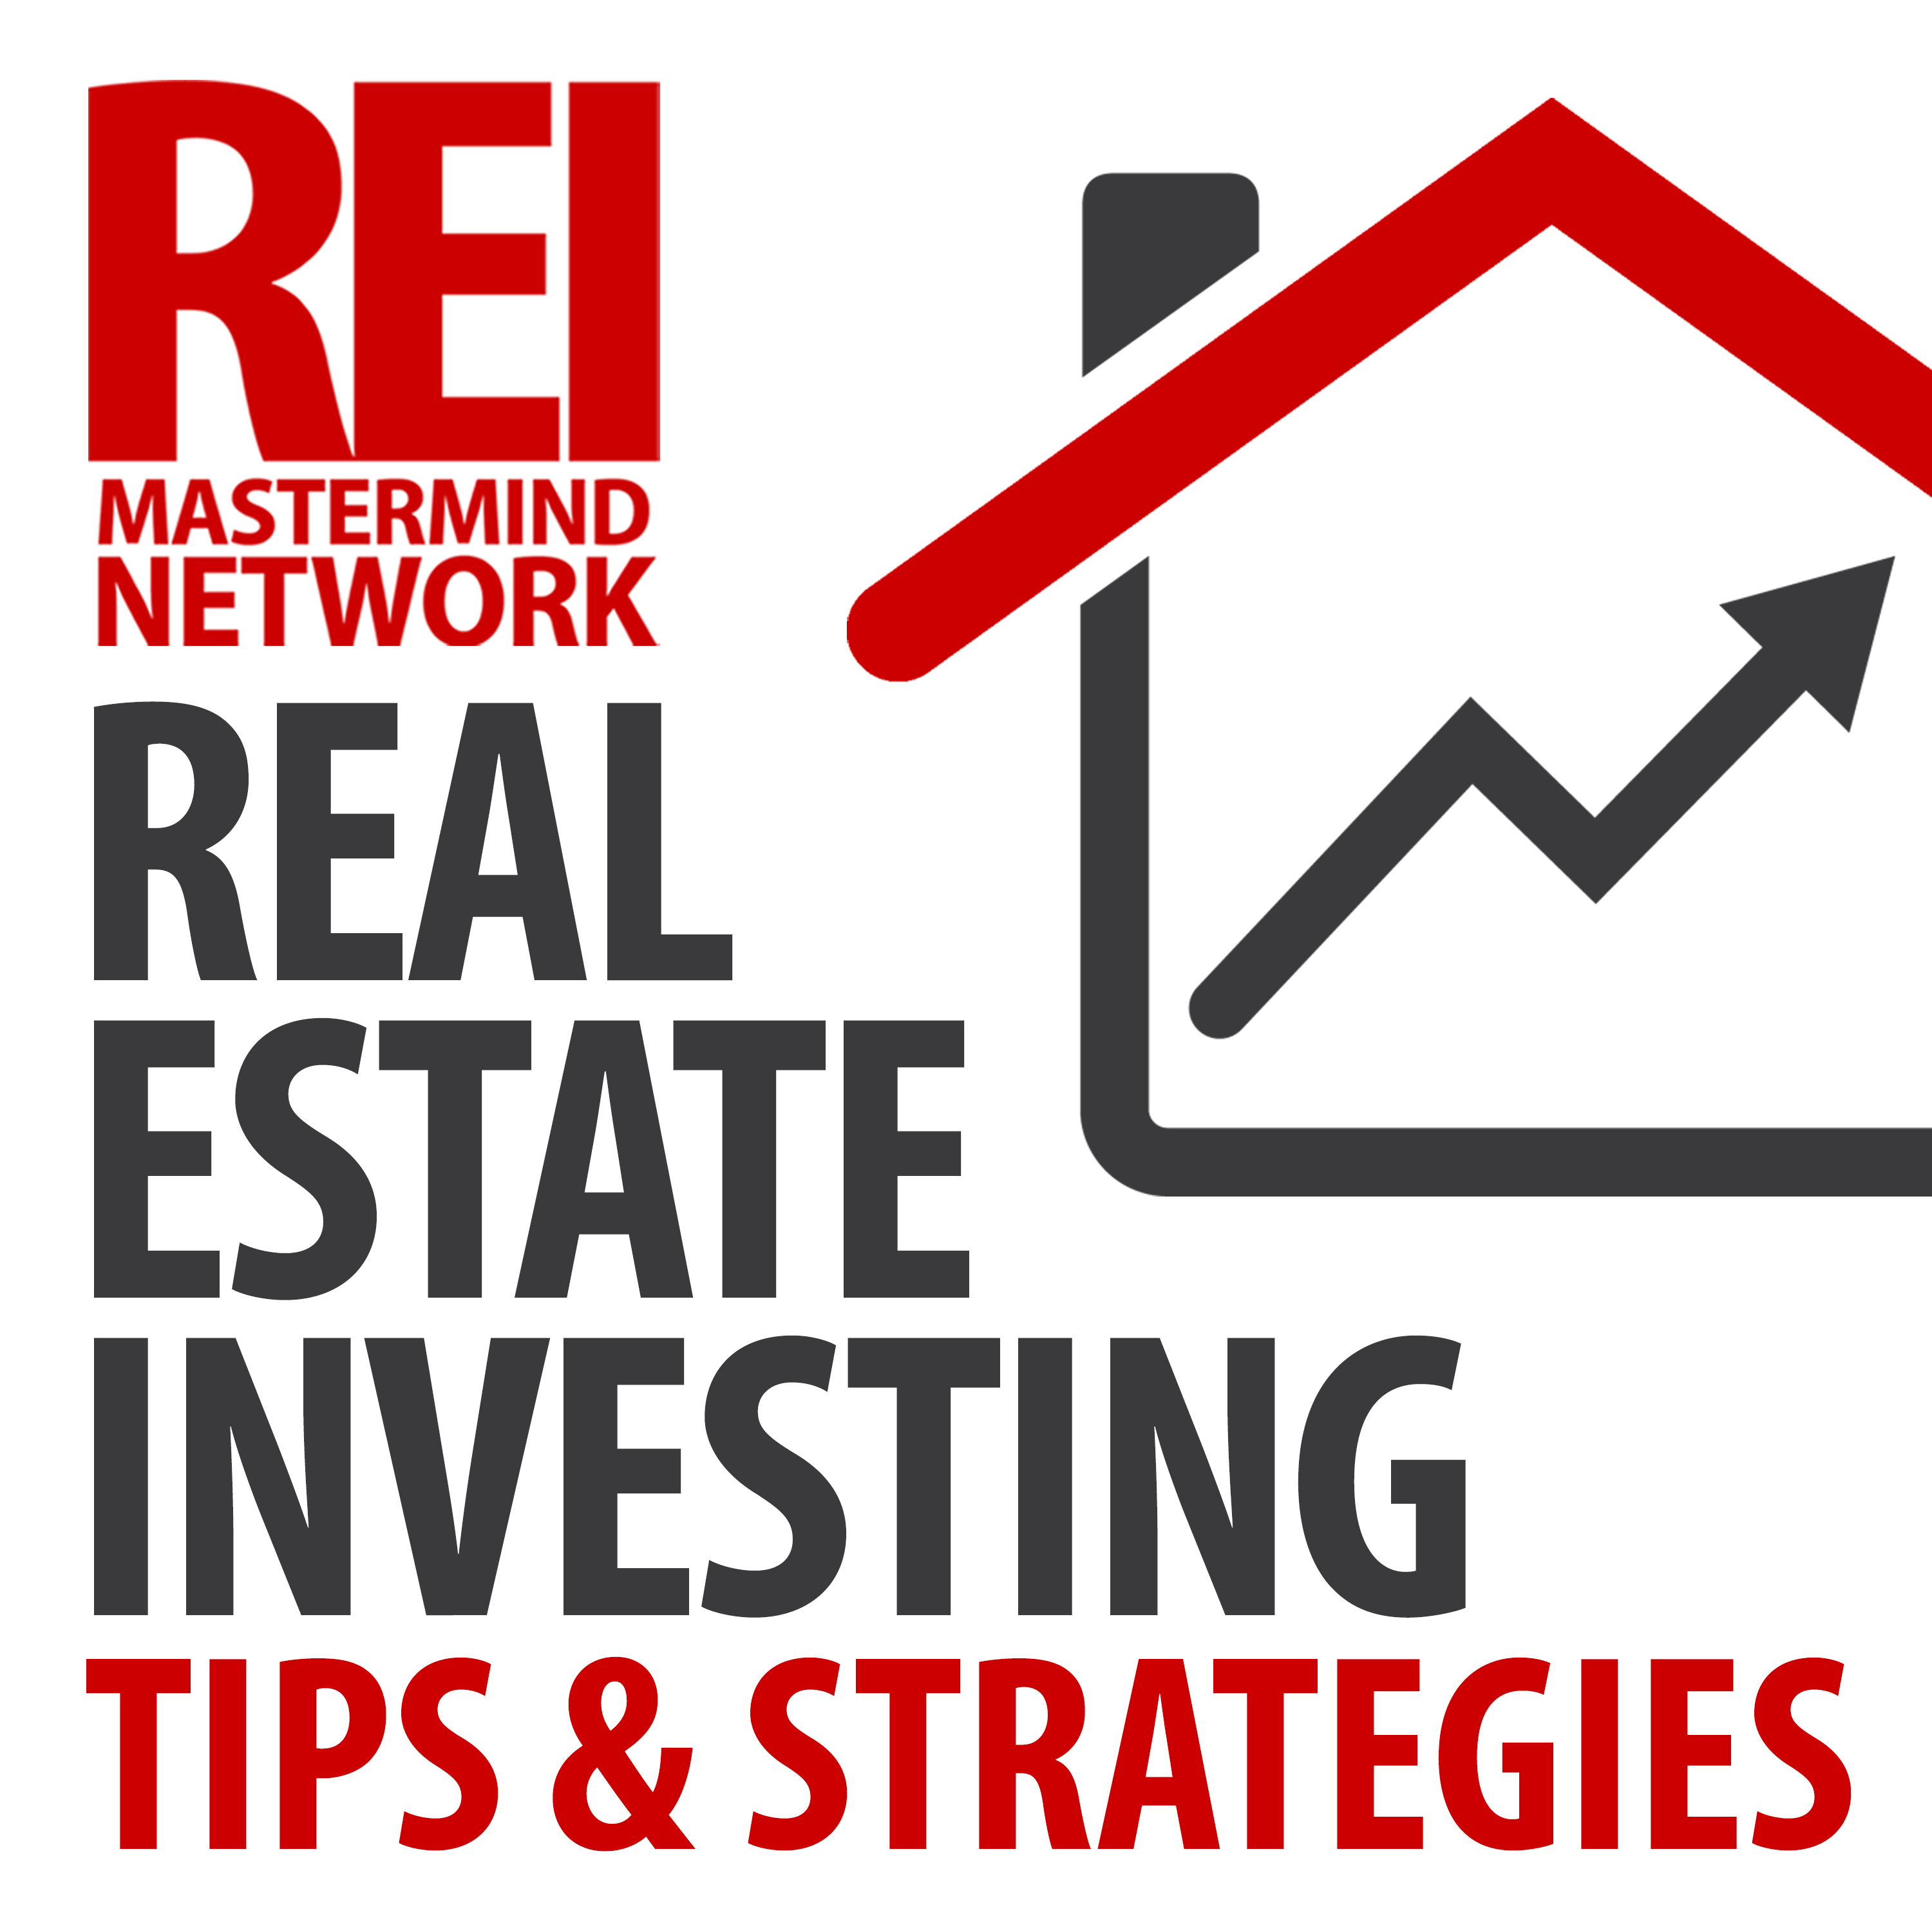 Is Real Estate Investing Hard?